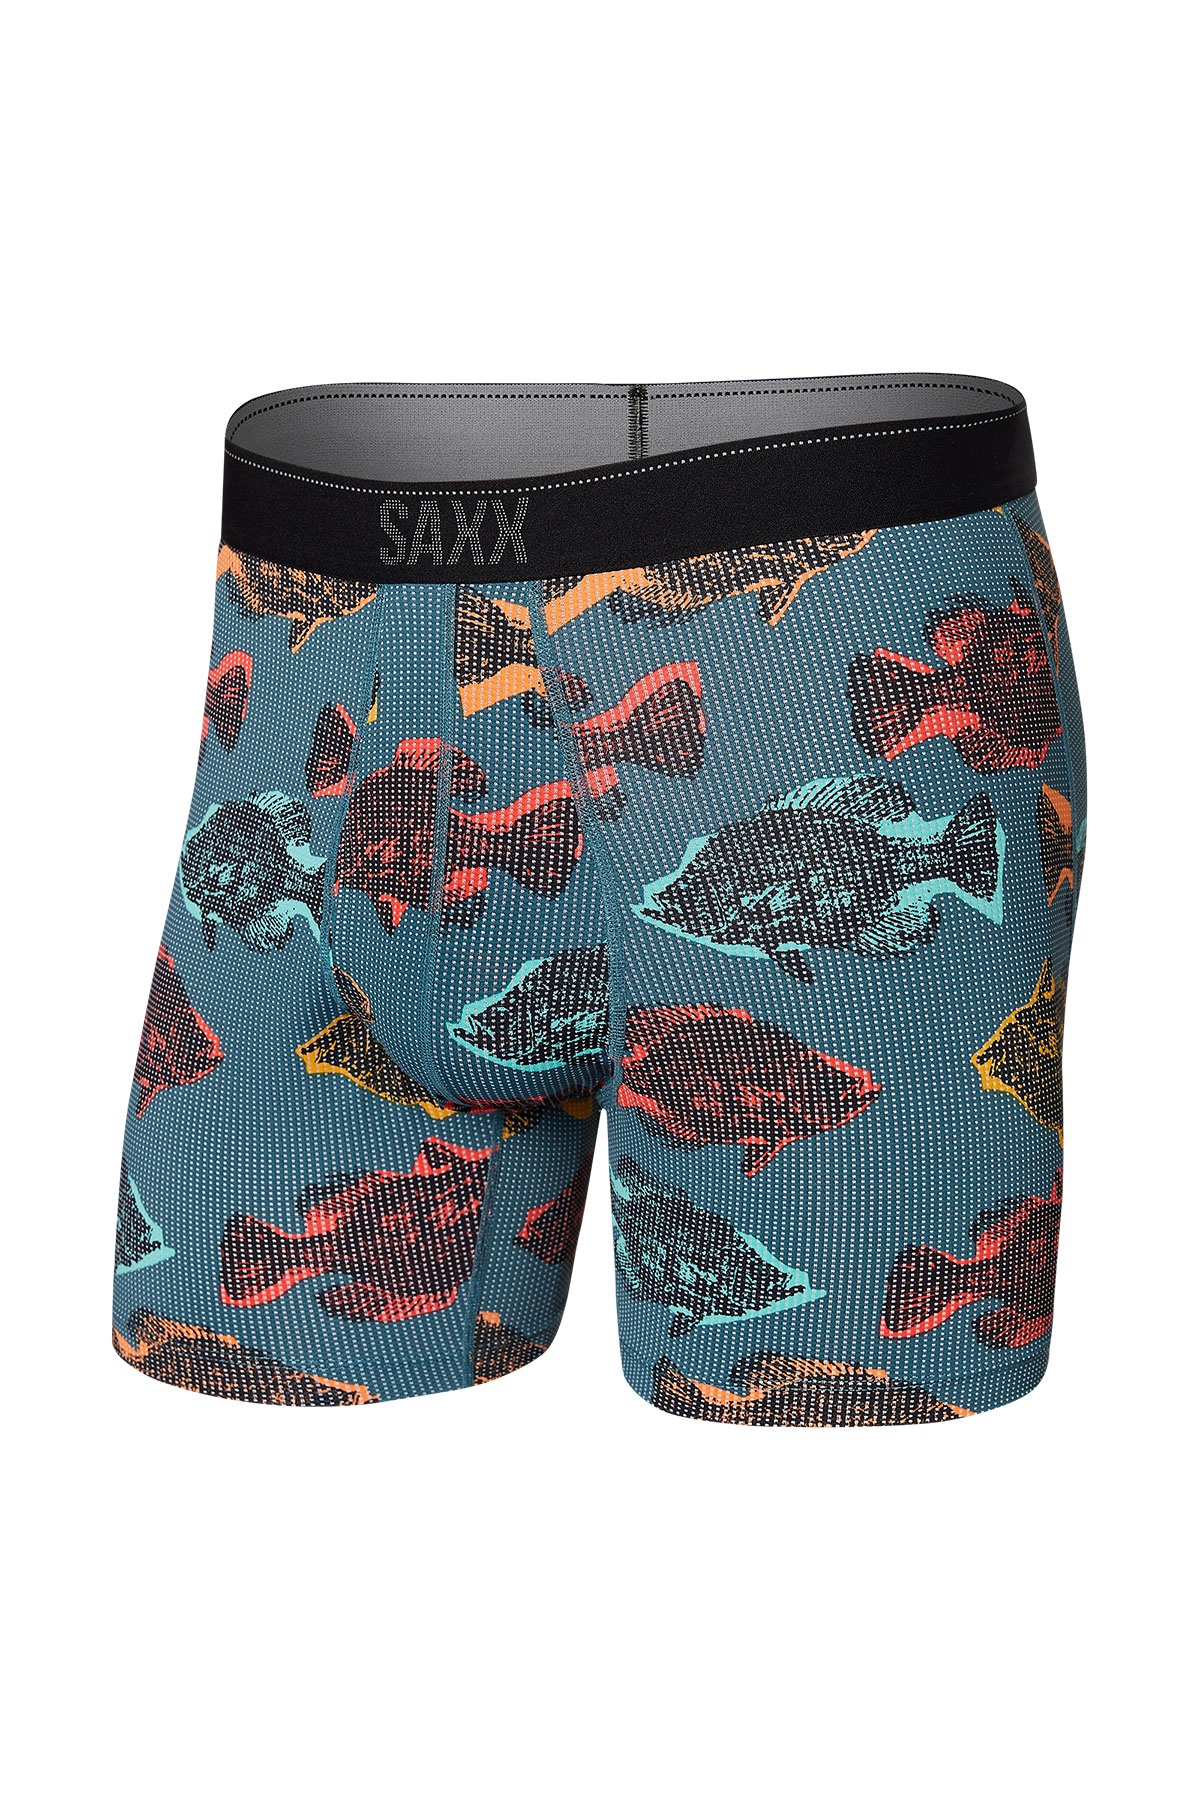 https://cdn11.bigcommerce.com/s-6ehfk/images/stencil/original/products/10619/30925/Saxx-Quest-Boxer-Brief-Fly-Shadow-Fish-Storm-Blue-SXBB70F-SFB-F__38117.1647489403.jpg?c=2?c=2&imbypass=on&imbypass=on